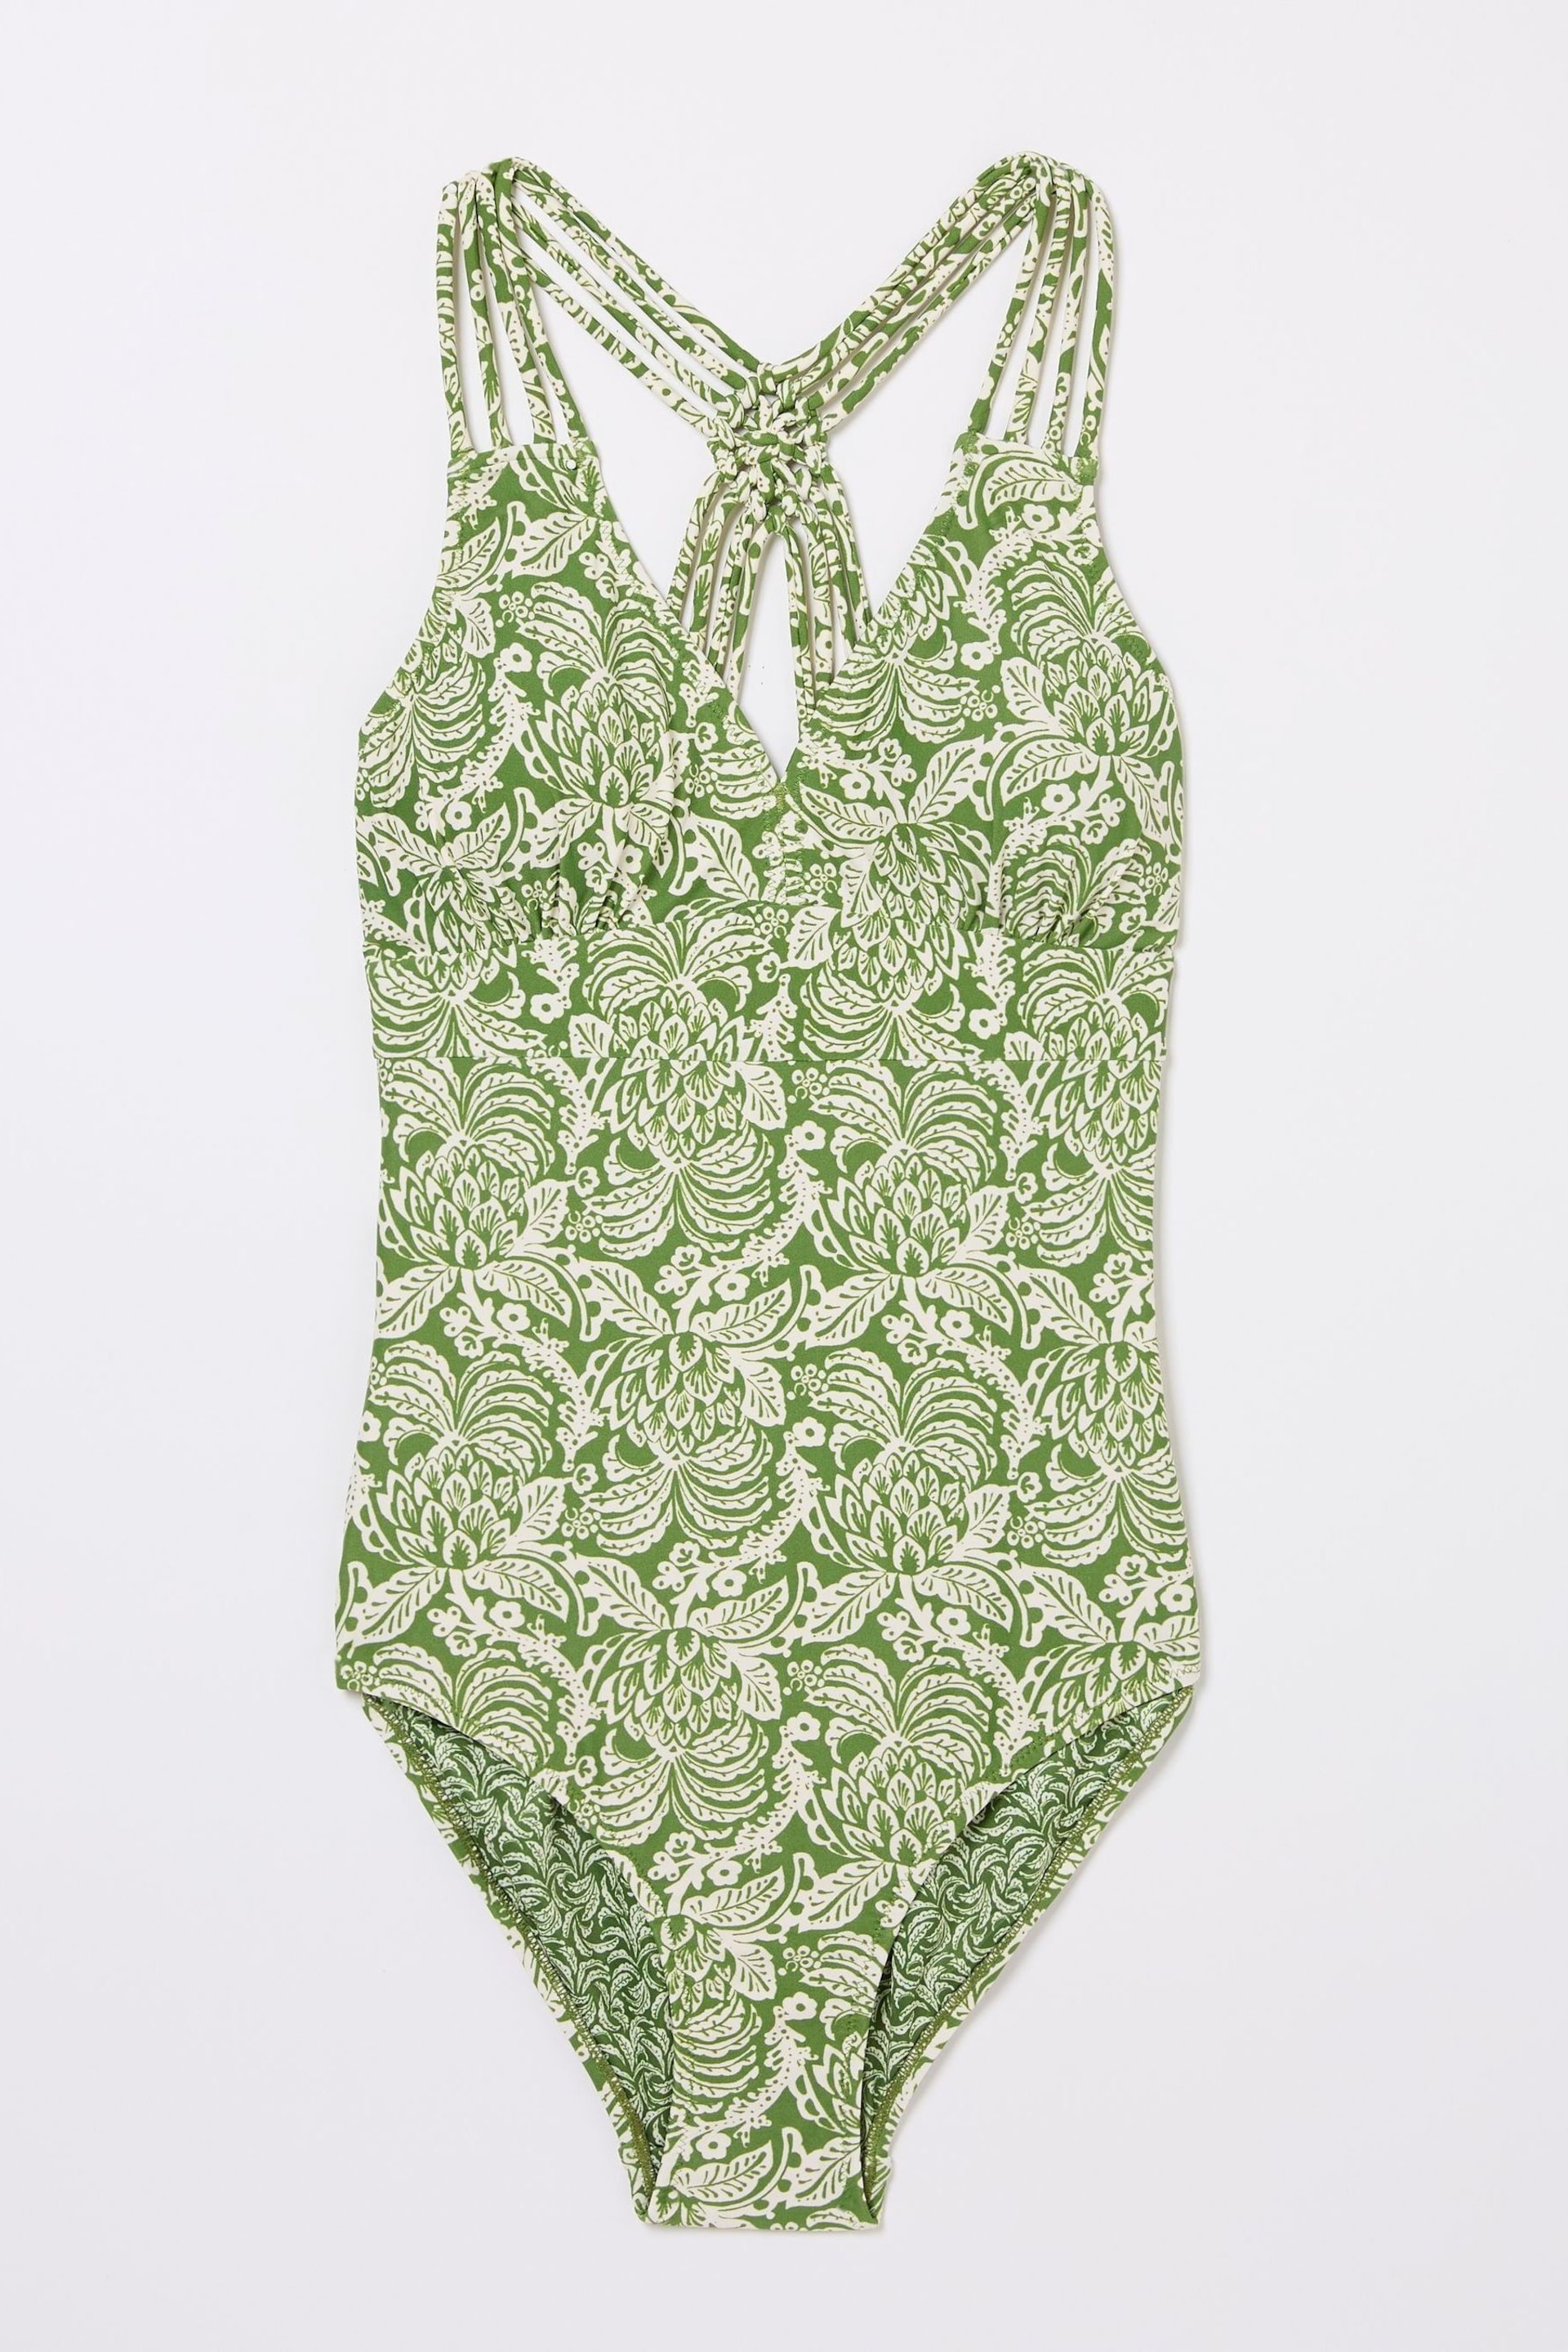 FatFace Green Ani Damask Floral Swimsuit - Image 5 of 5